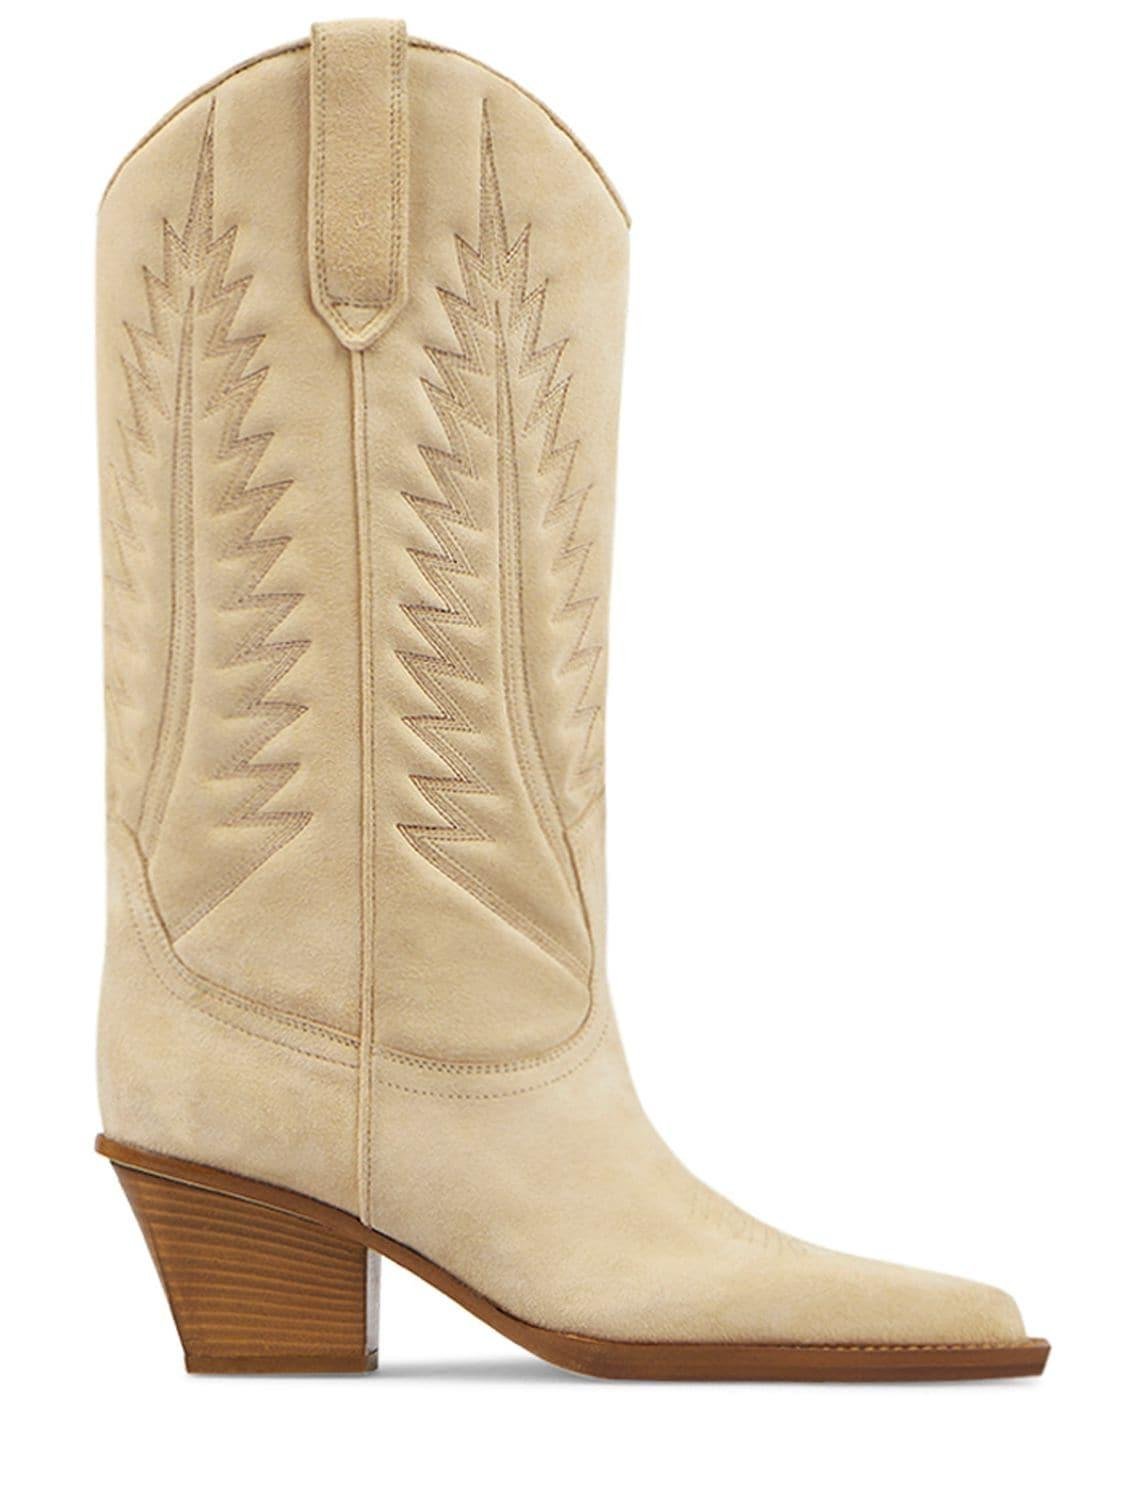 60mm Rosario Suede Tall Boots by PARIS TEXAS